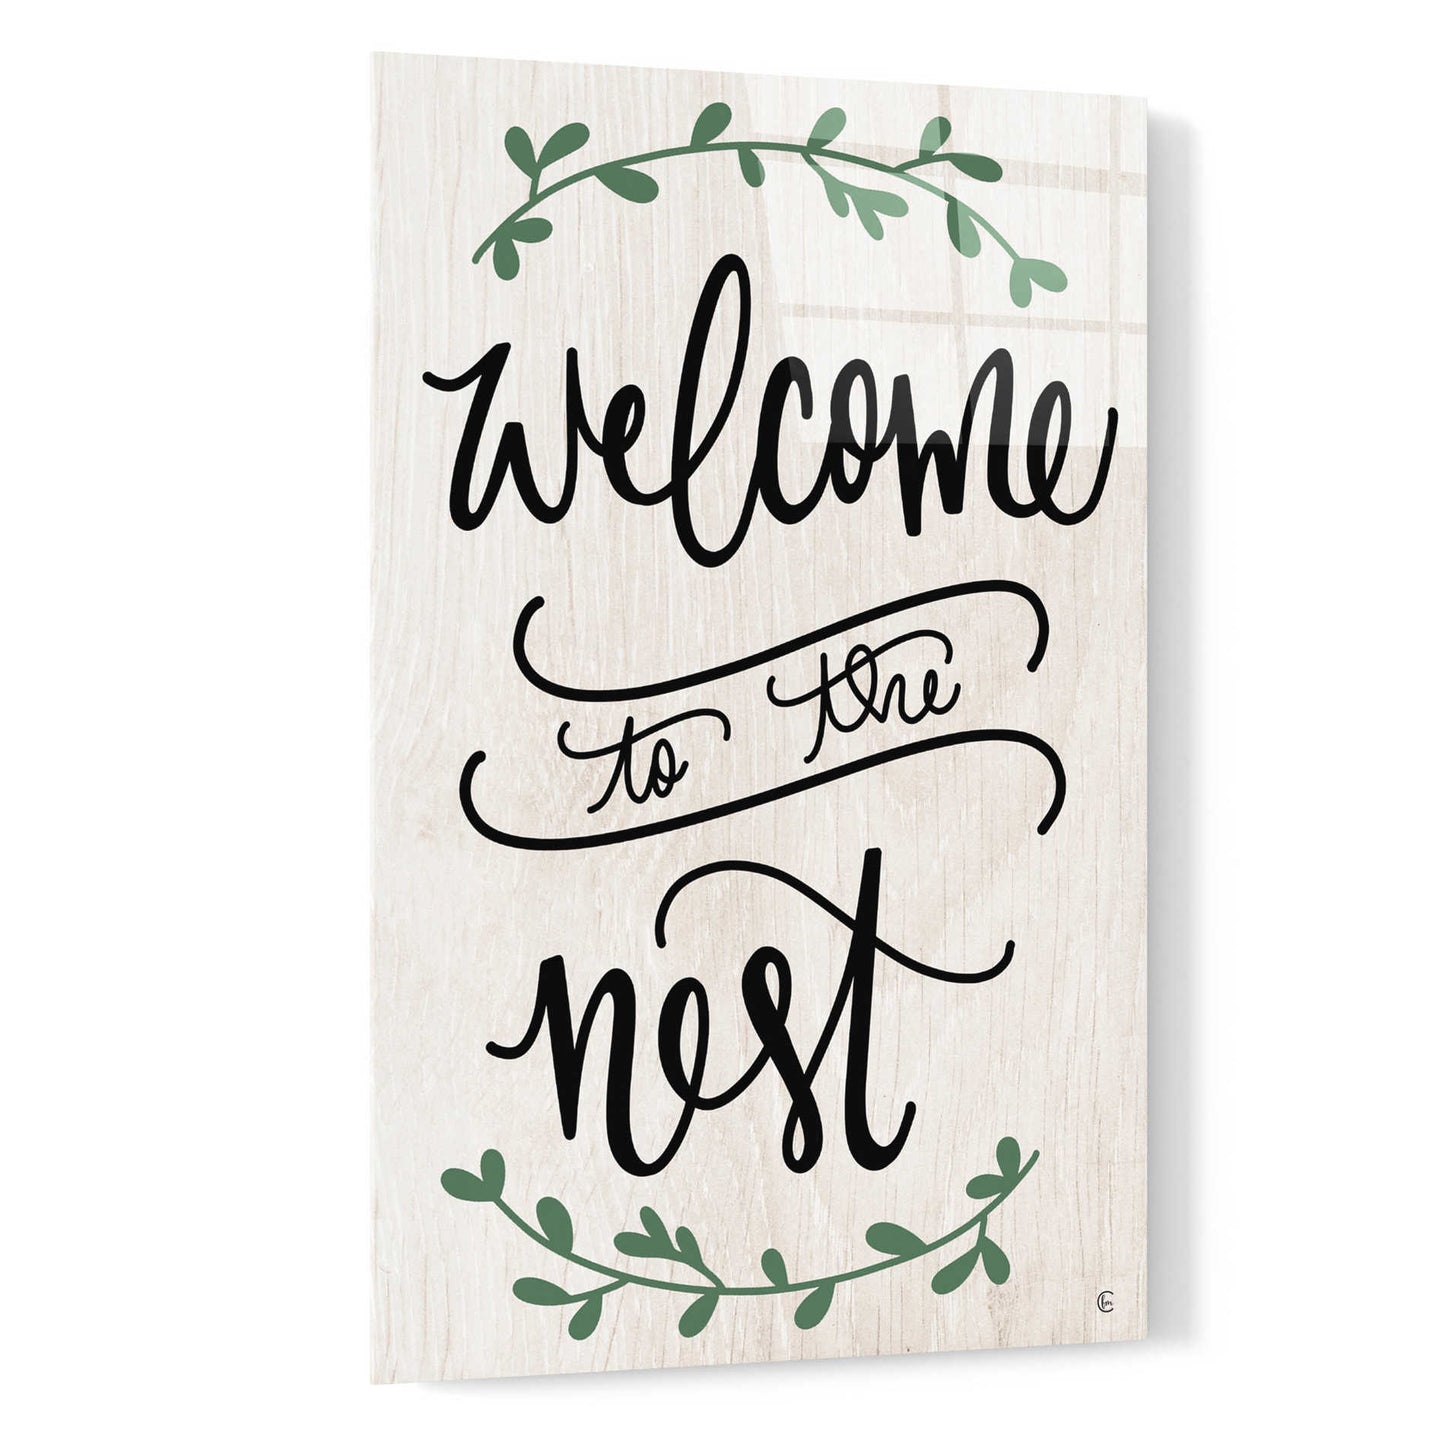 Epic Art 'Welcome to the Nest' by Fearfully Made Creations, Acrylic Glass Wall Art,16x24